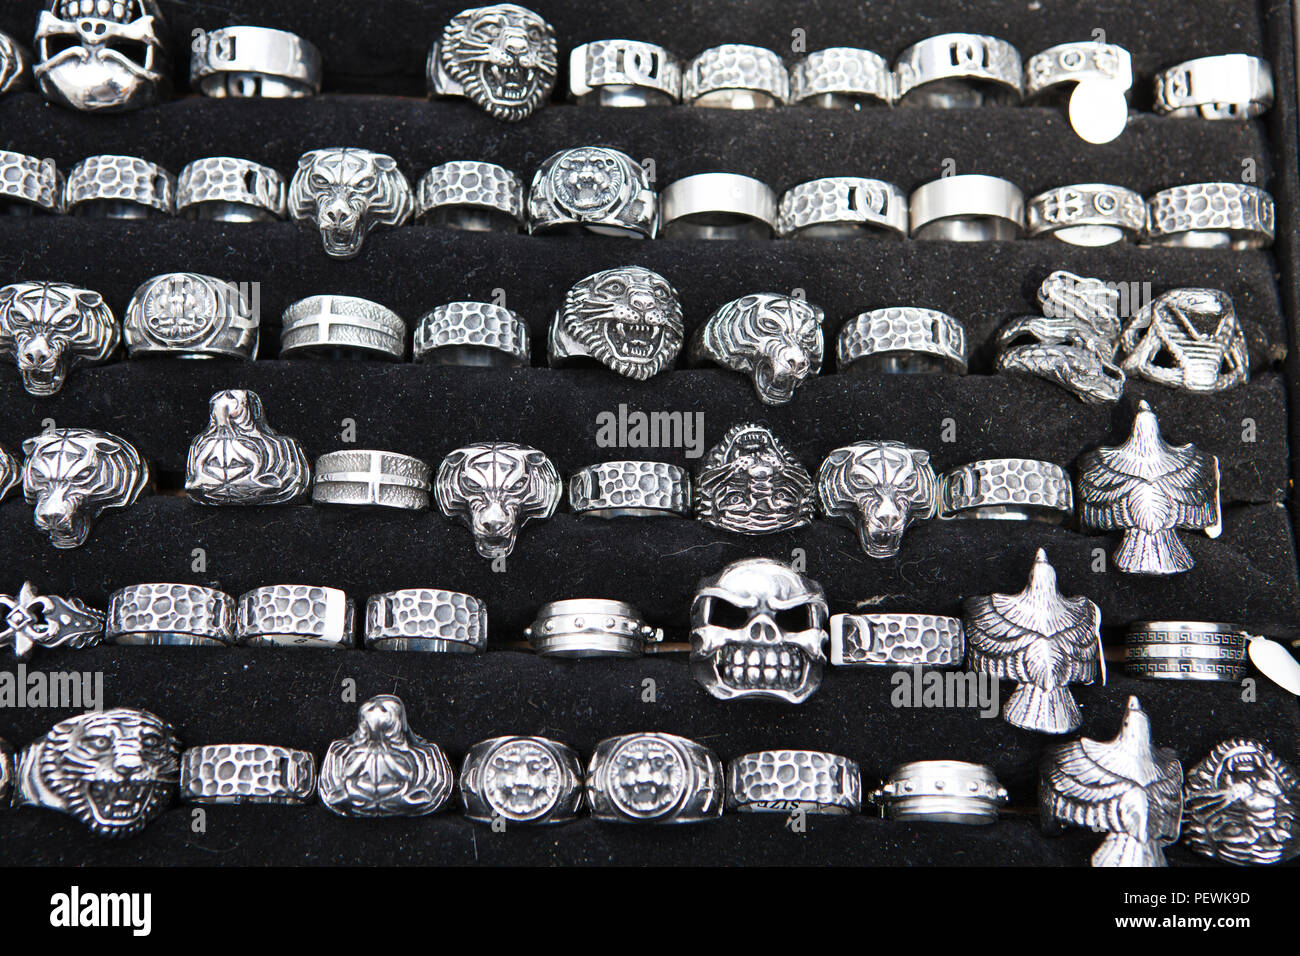 Shop for gothic rings, Germany, Europe Stock Photo